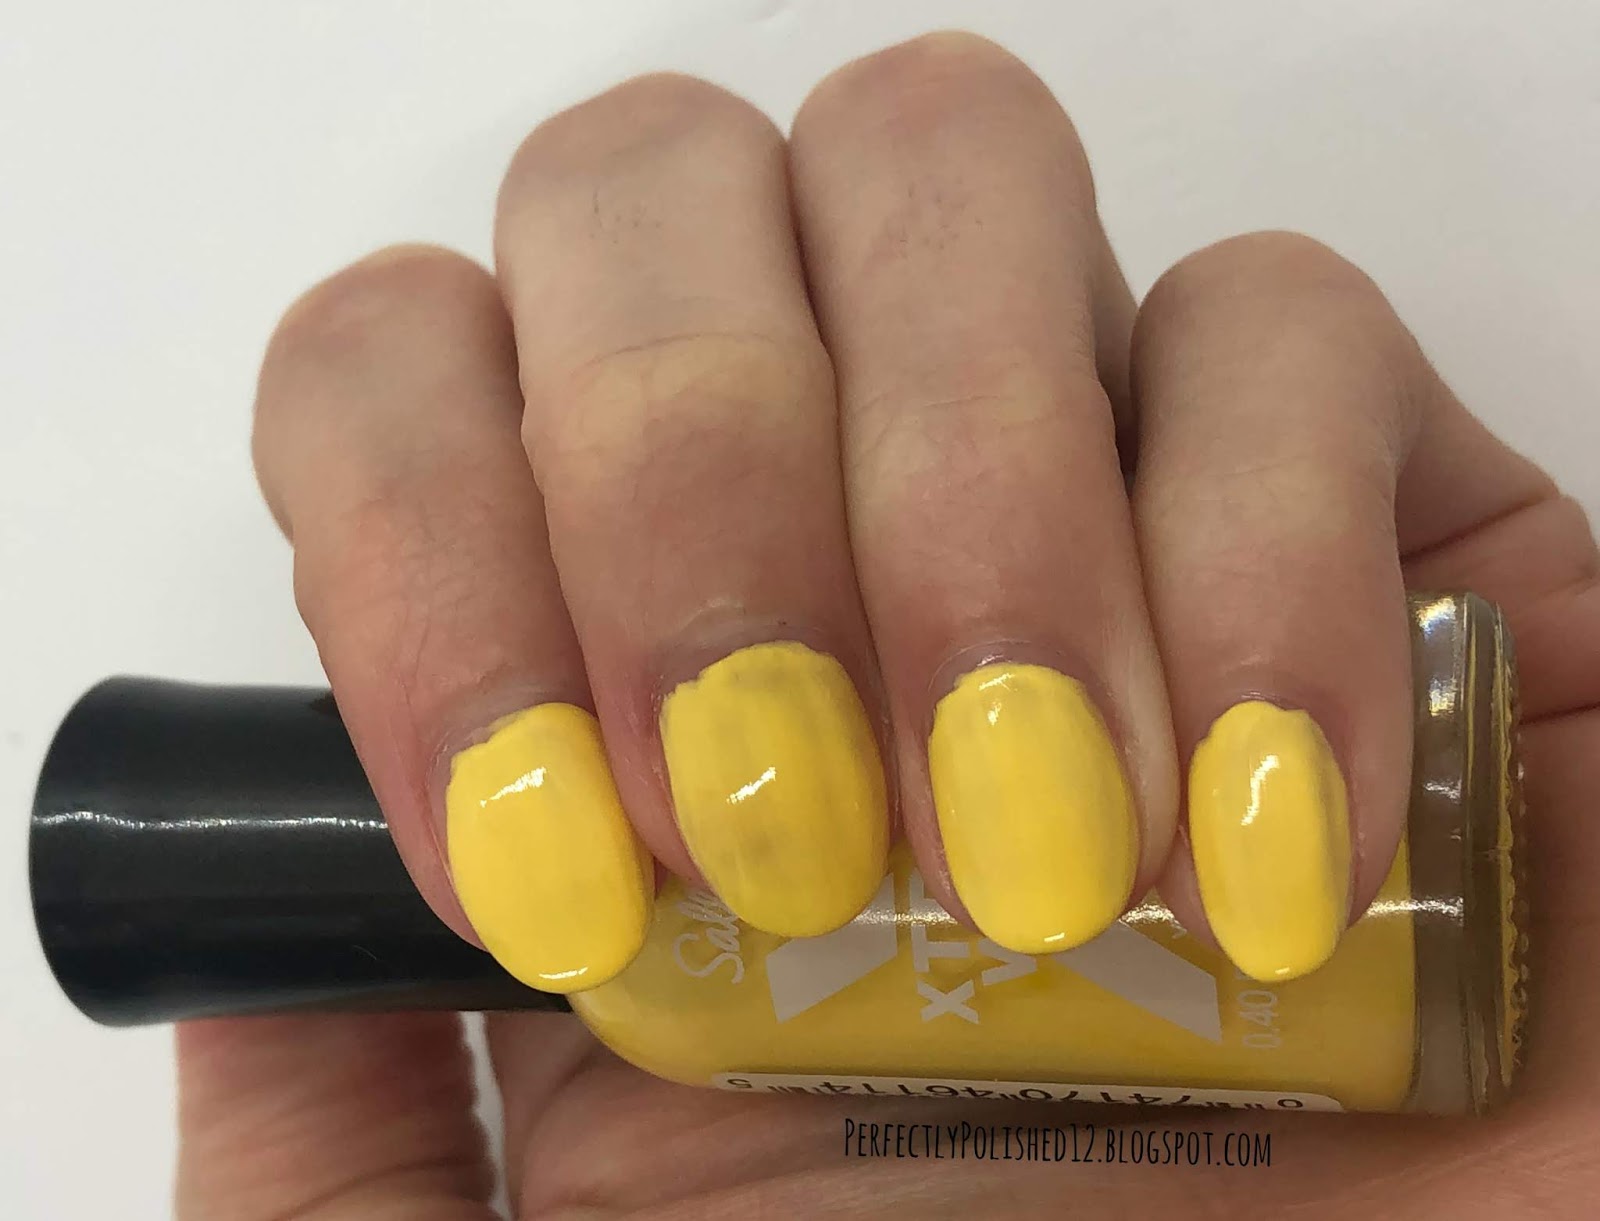 Perfectly Polished 12: Sally Hansen Xtreme Wear 